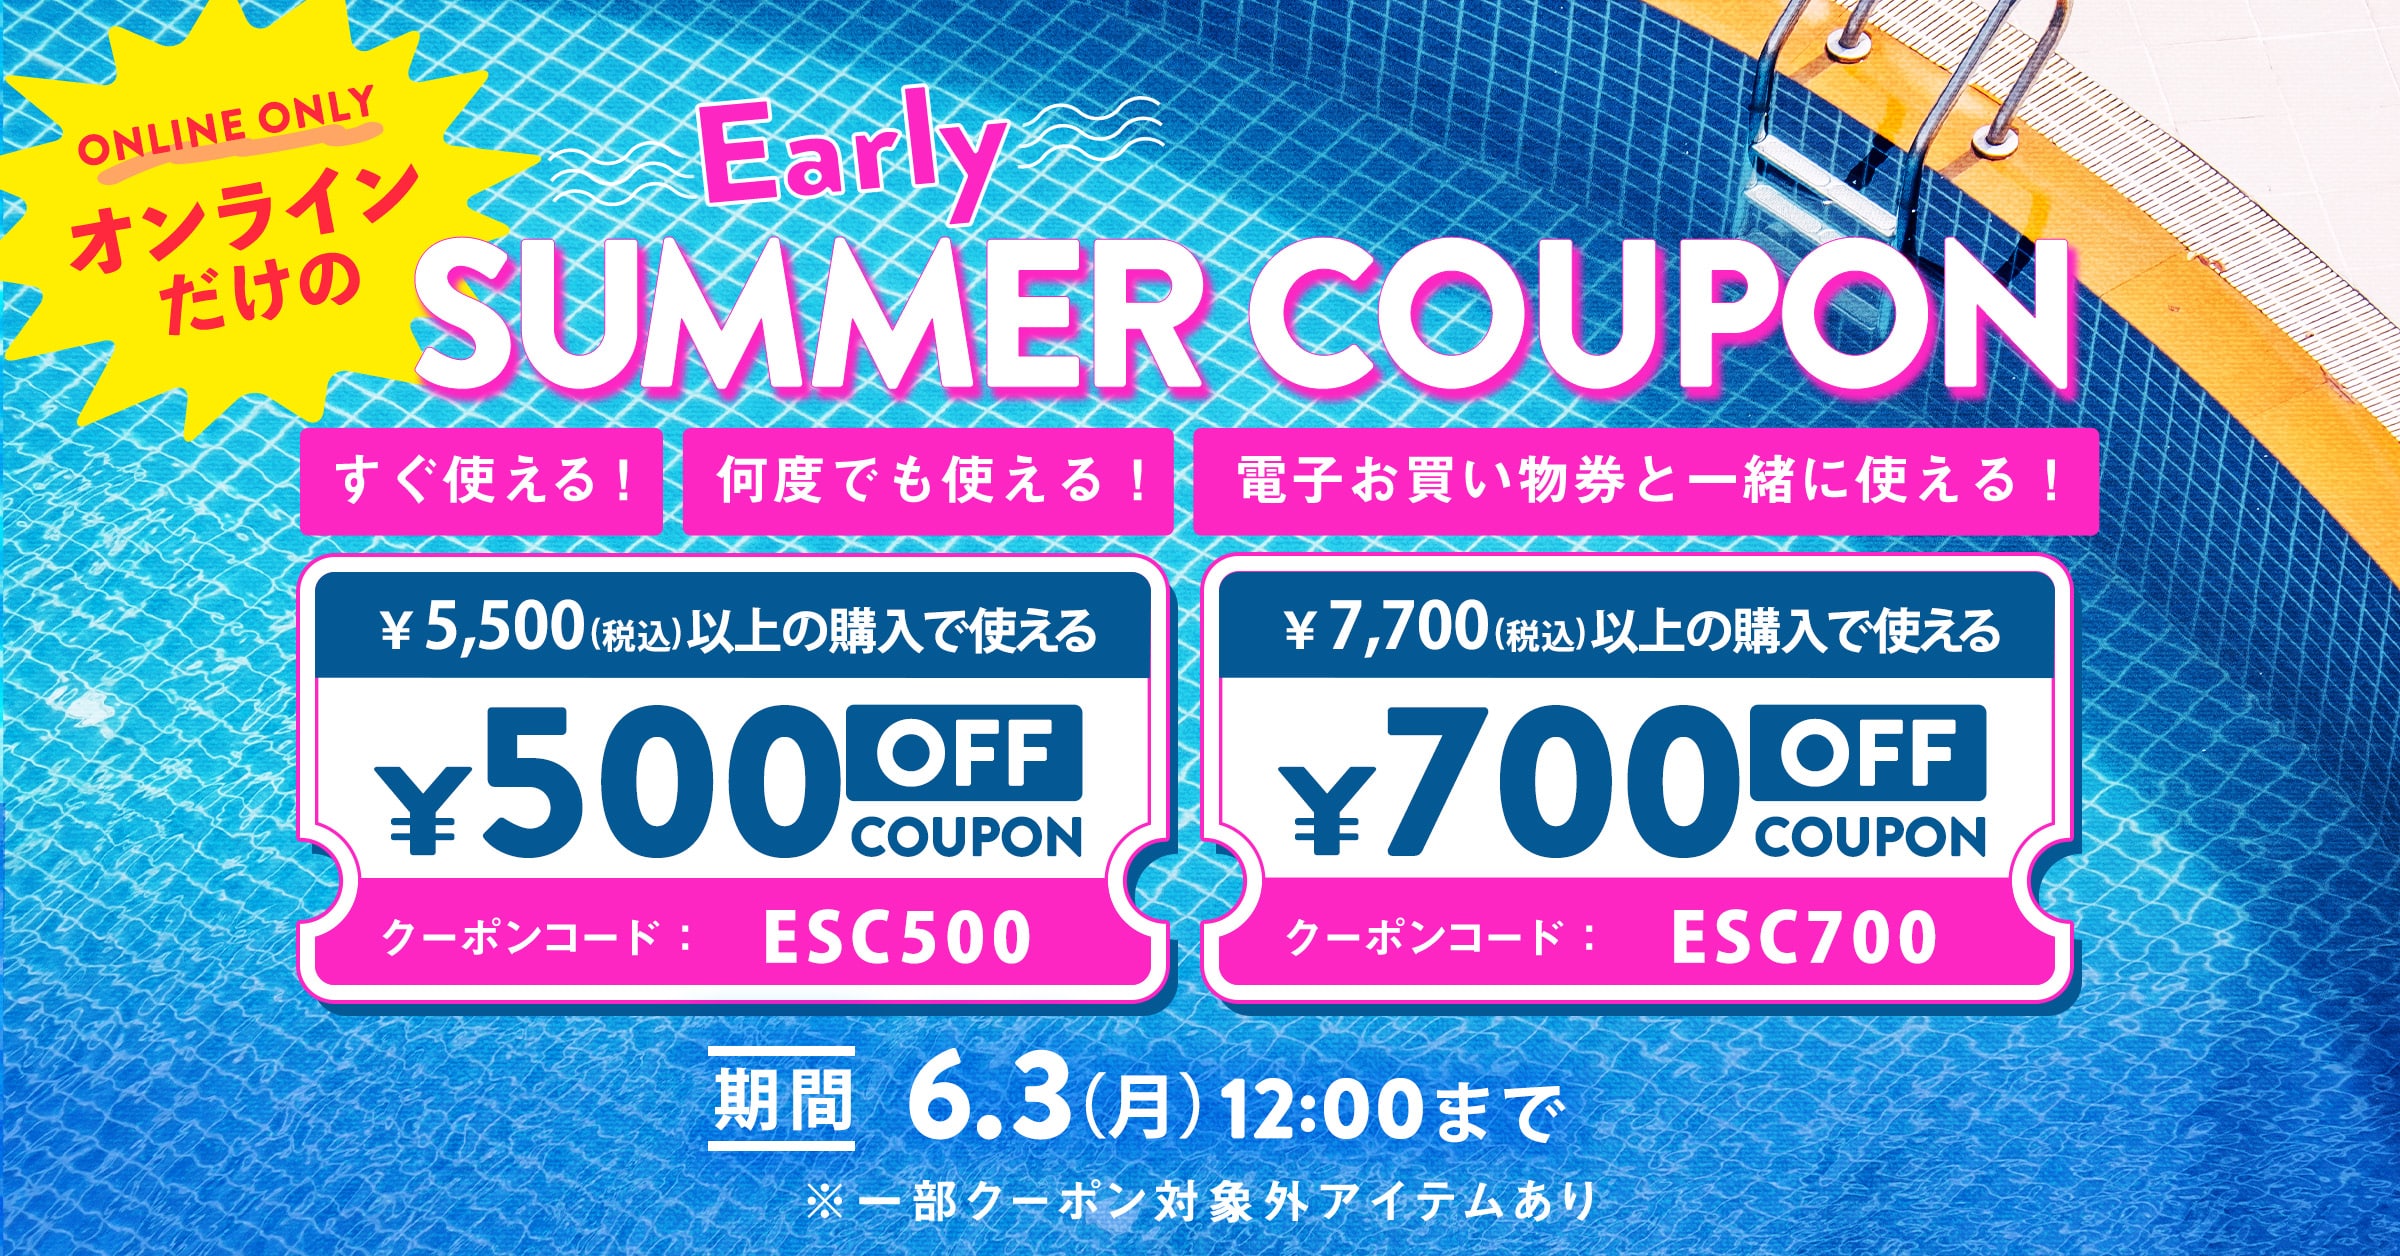 EARLY SUMMER coupon